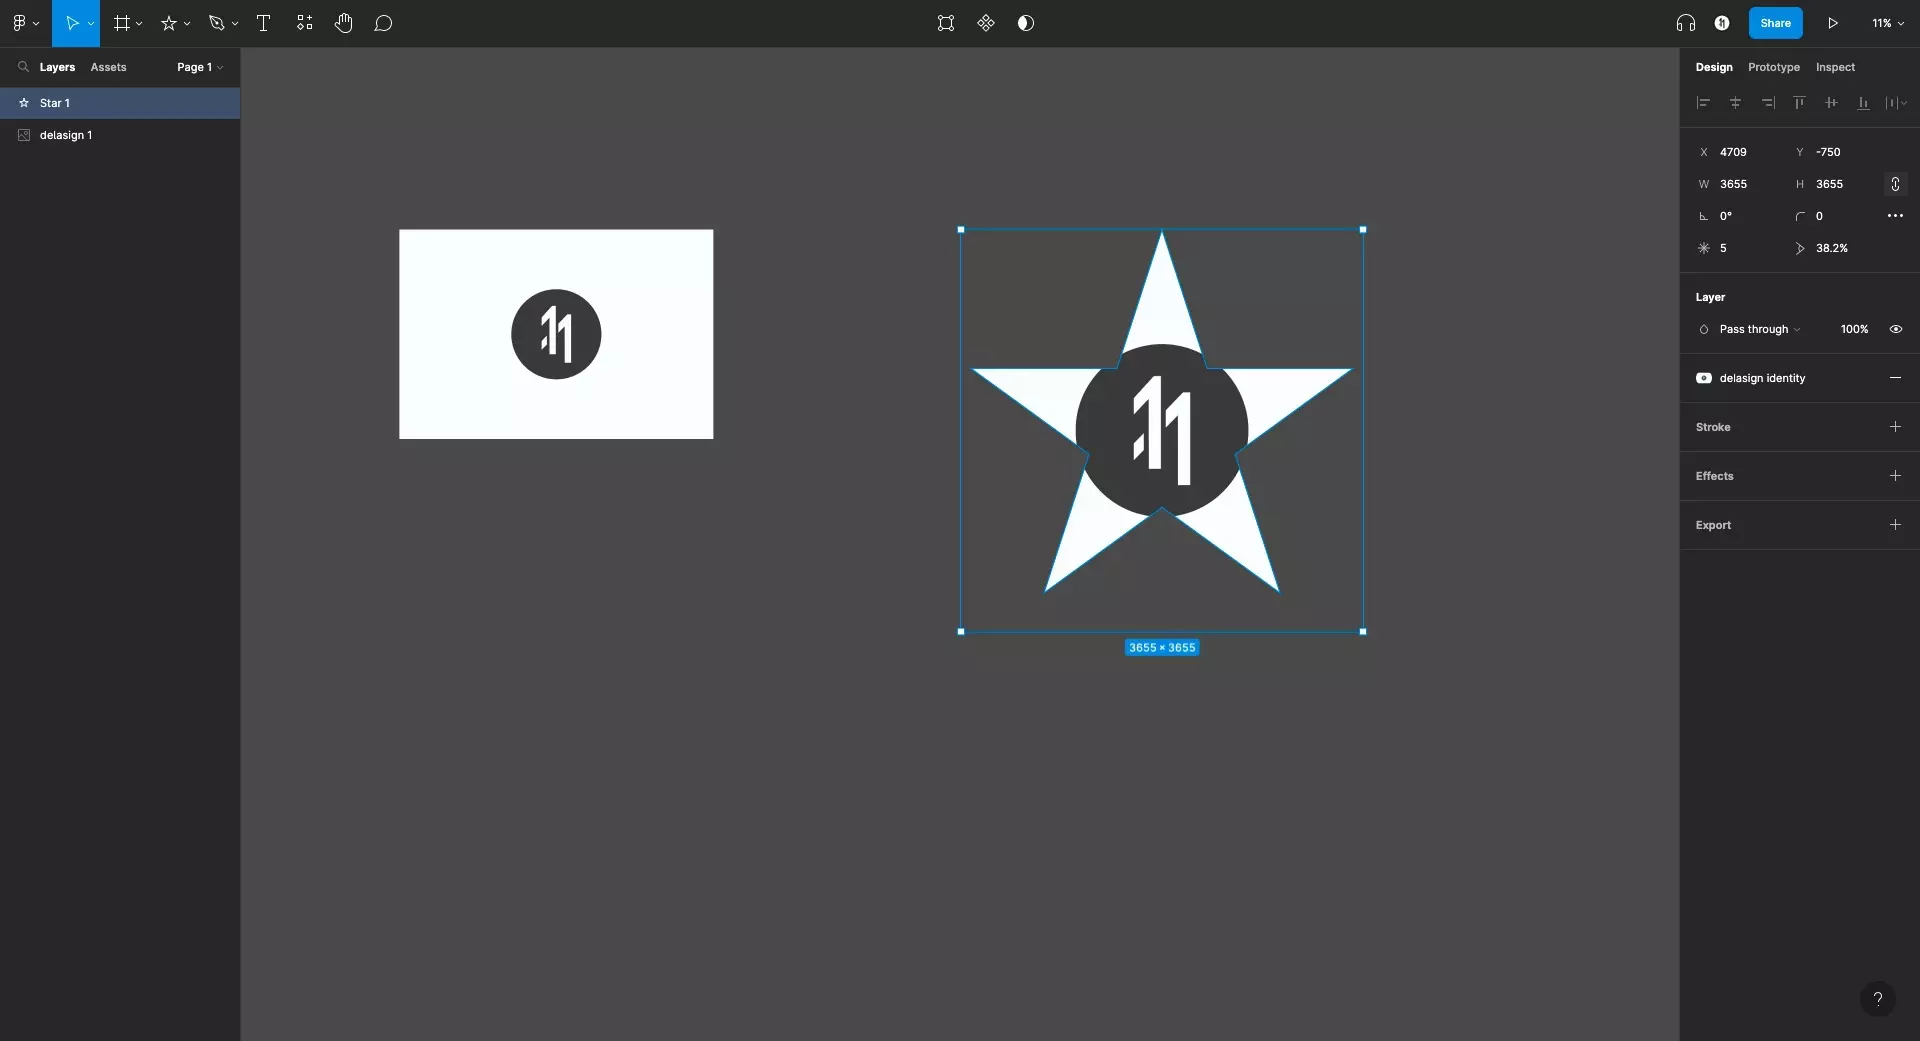 A screenshot of Figma with the delasign identity color style applied to the star that we drew in the previous step.